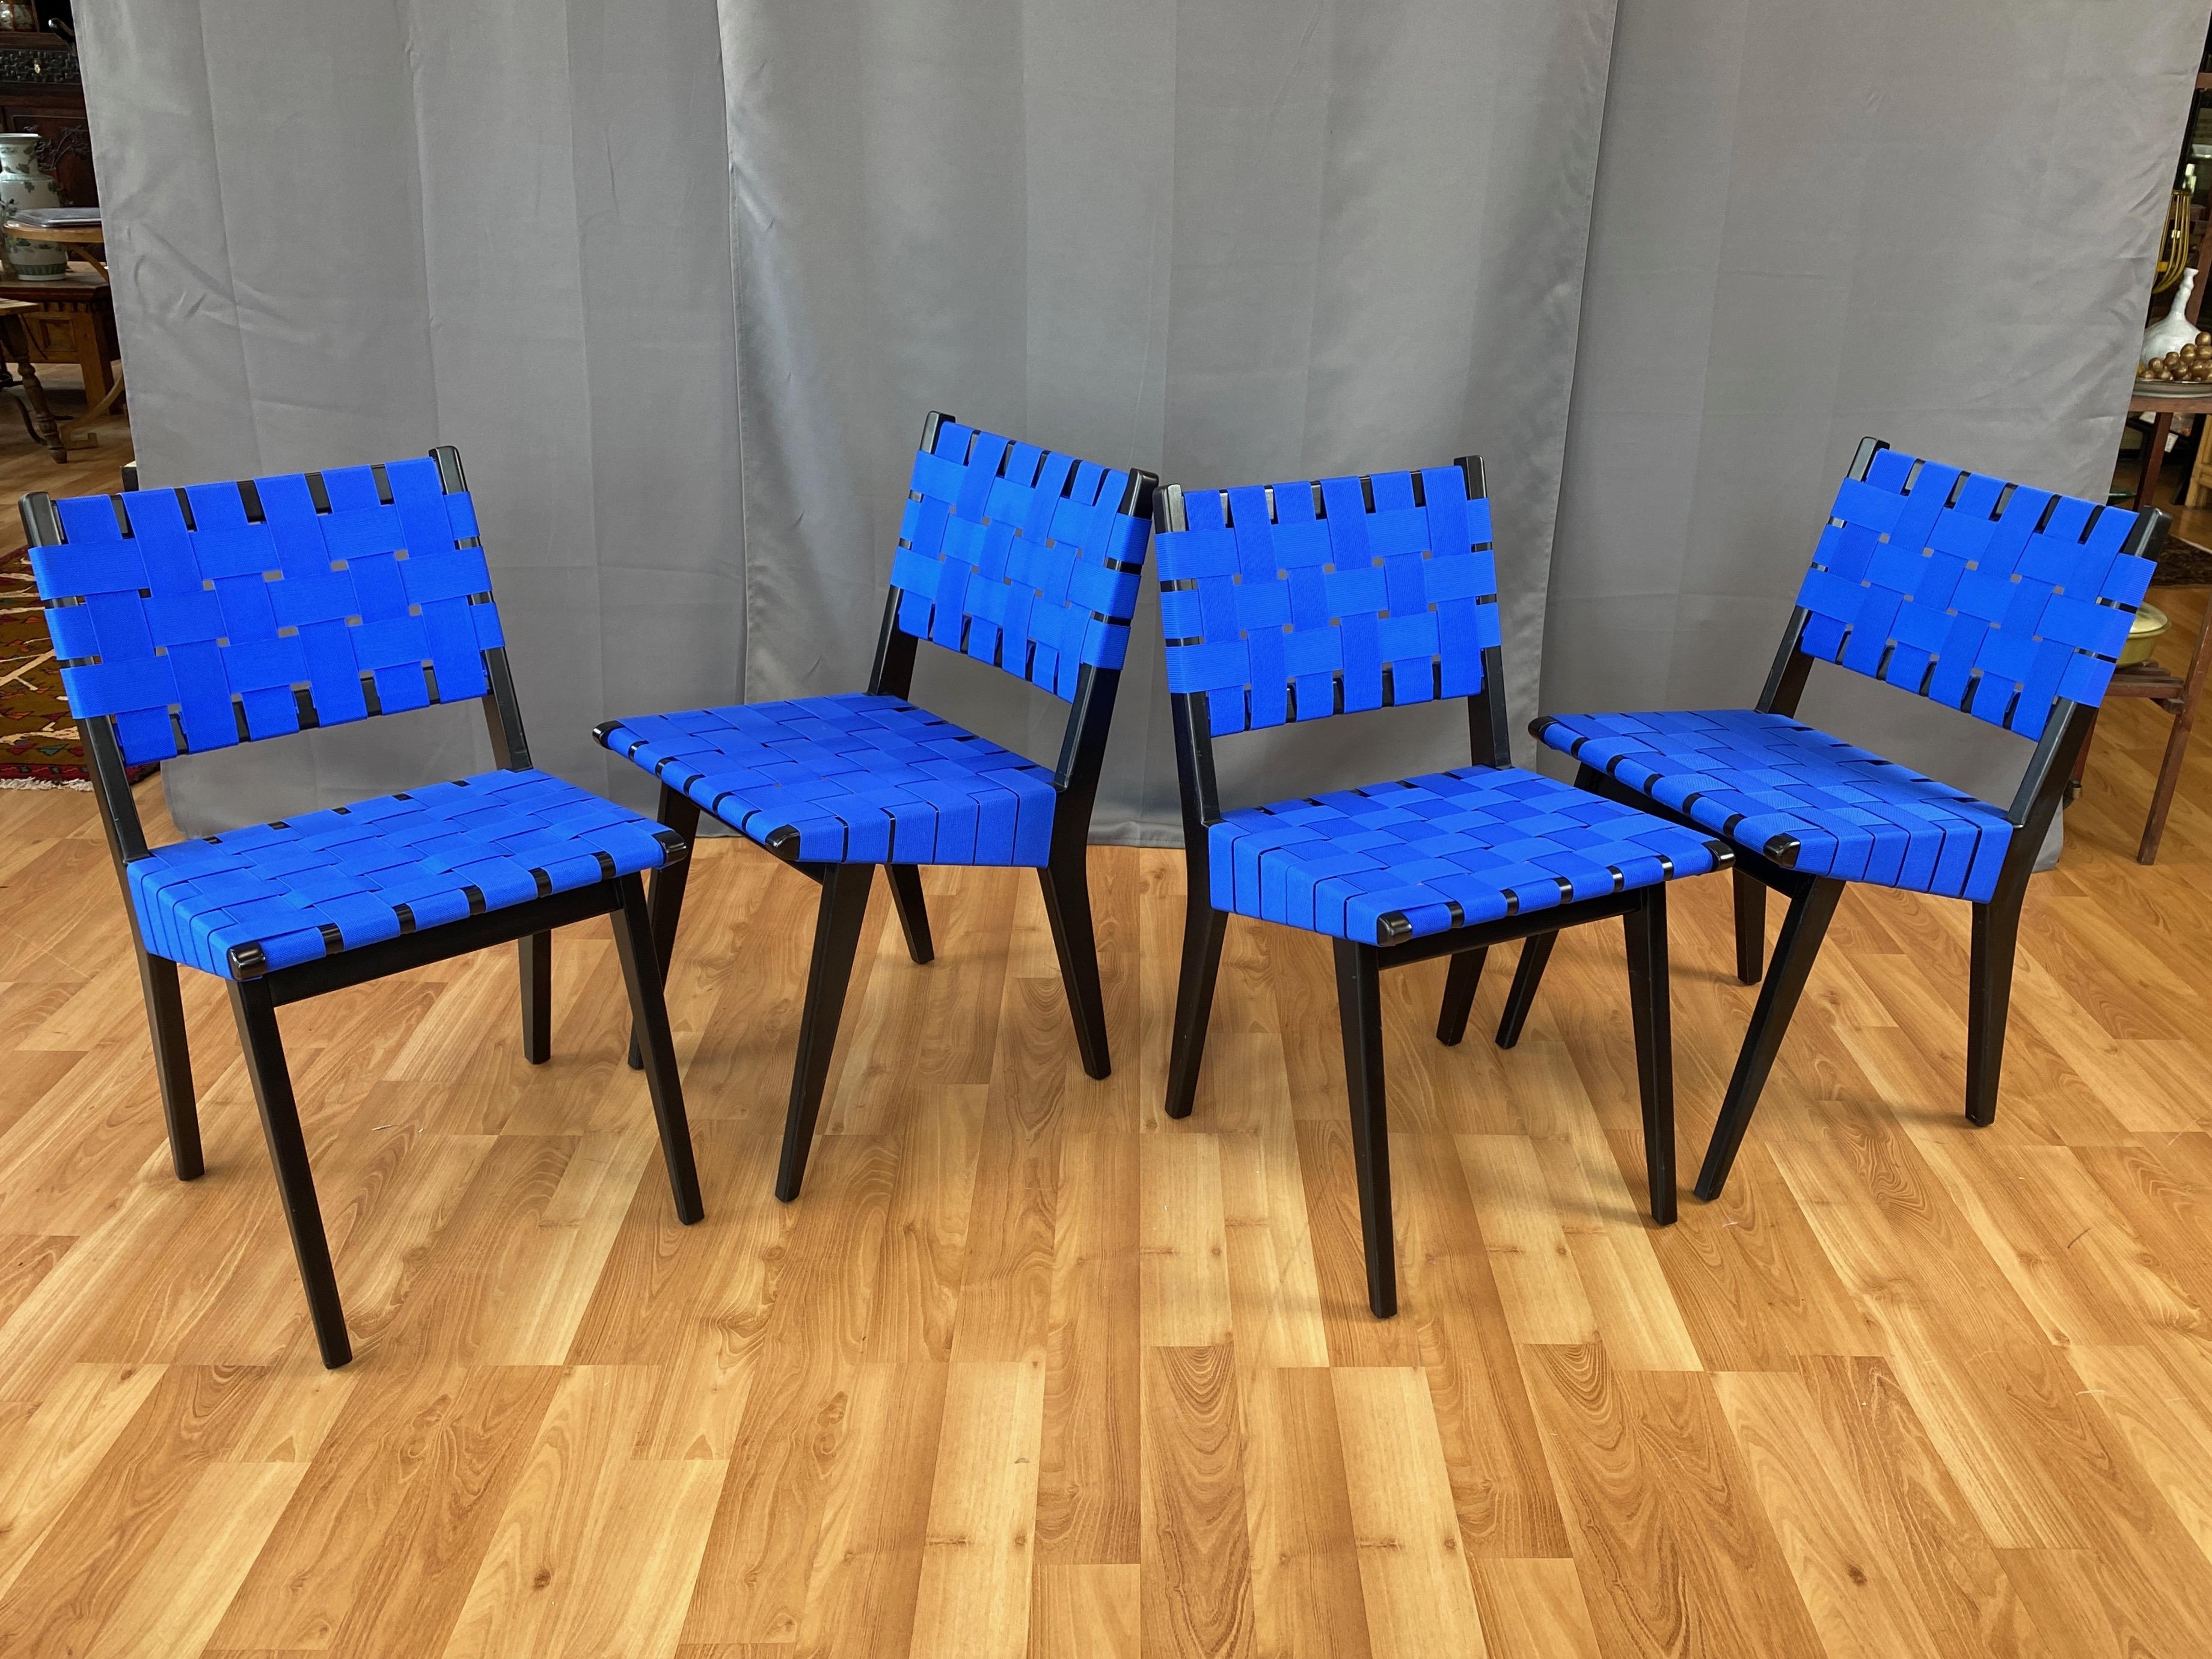 A four-piece set of early 2010s Jens Risom side chairs for KnollStudio in ebonized maple with blue webbing seats.

Iconic chair was conceived in 1941 and introduced in 1943 by the Hans Knoll Furniture Company as part of their very first